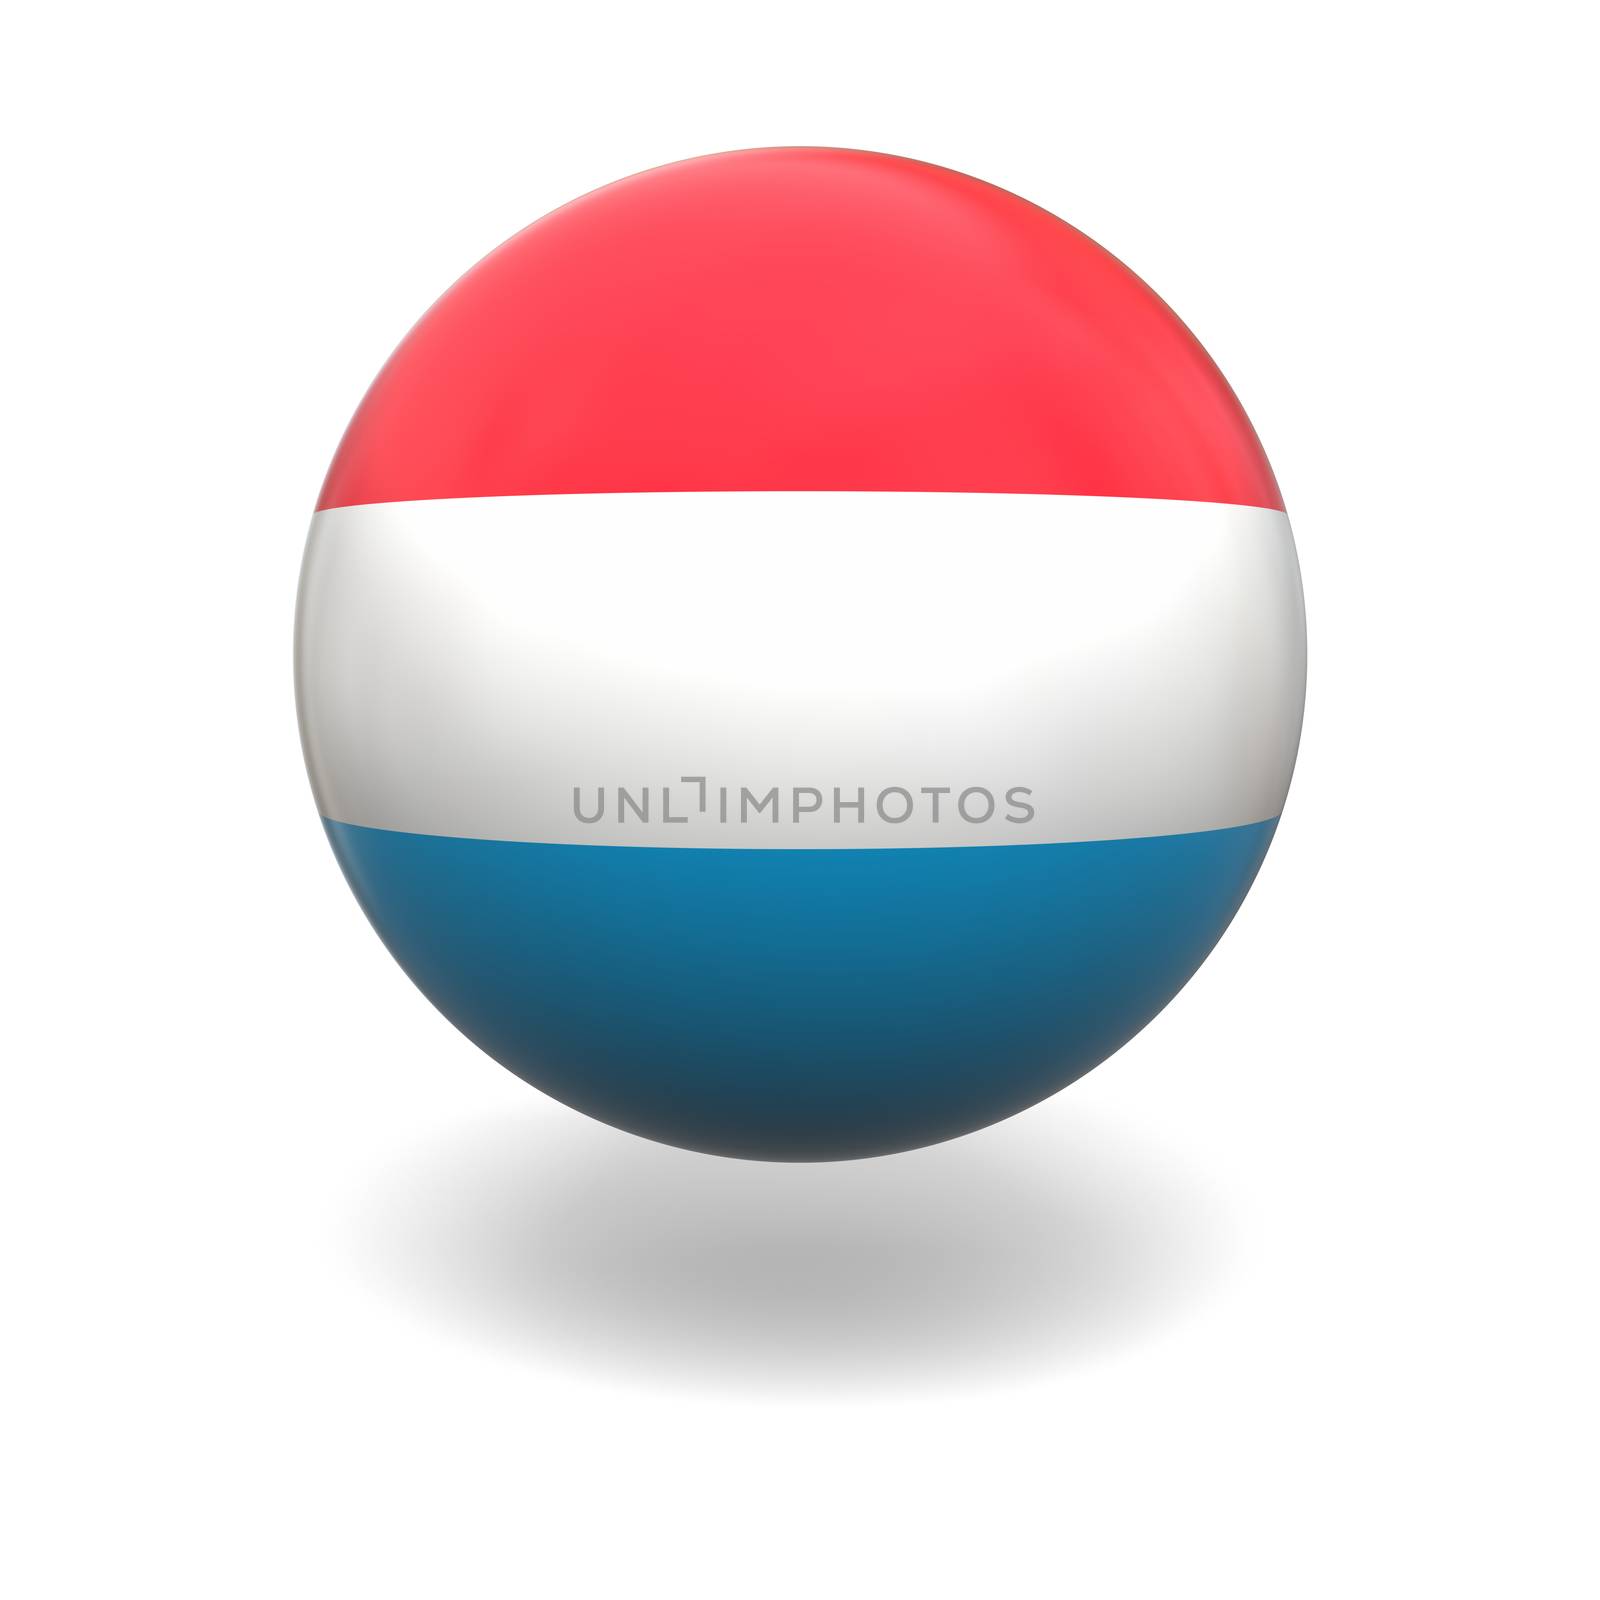 Luxembourg flag by Harvepino